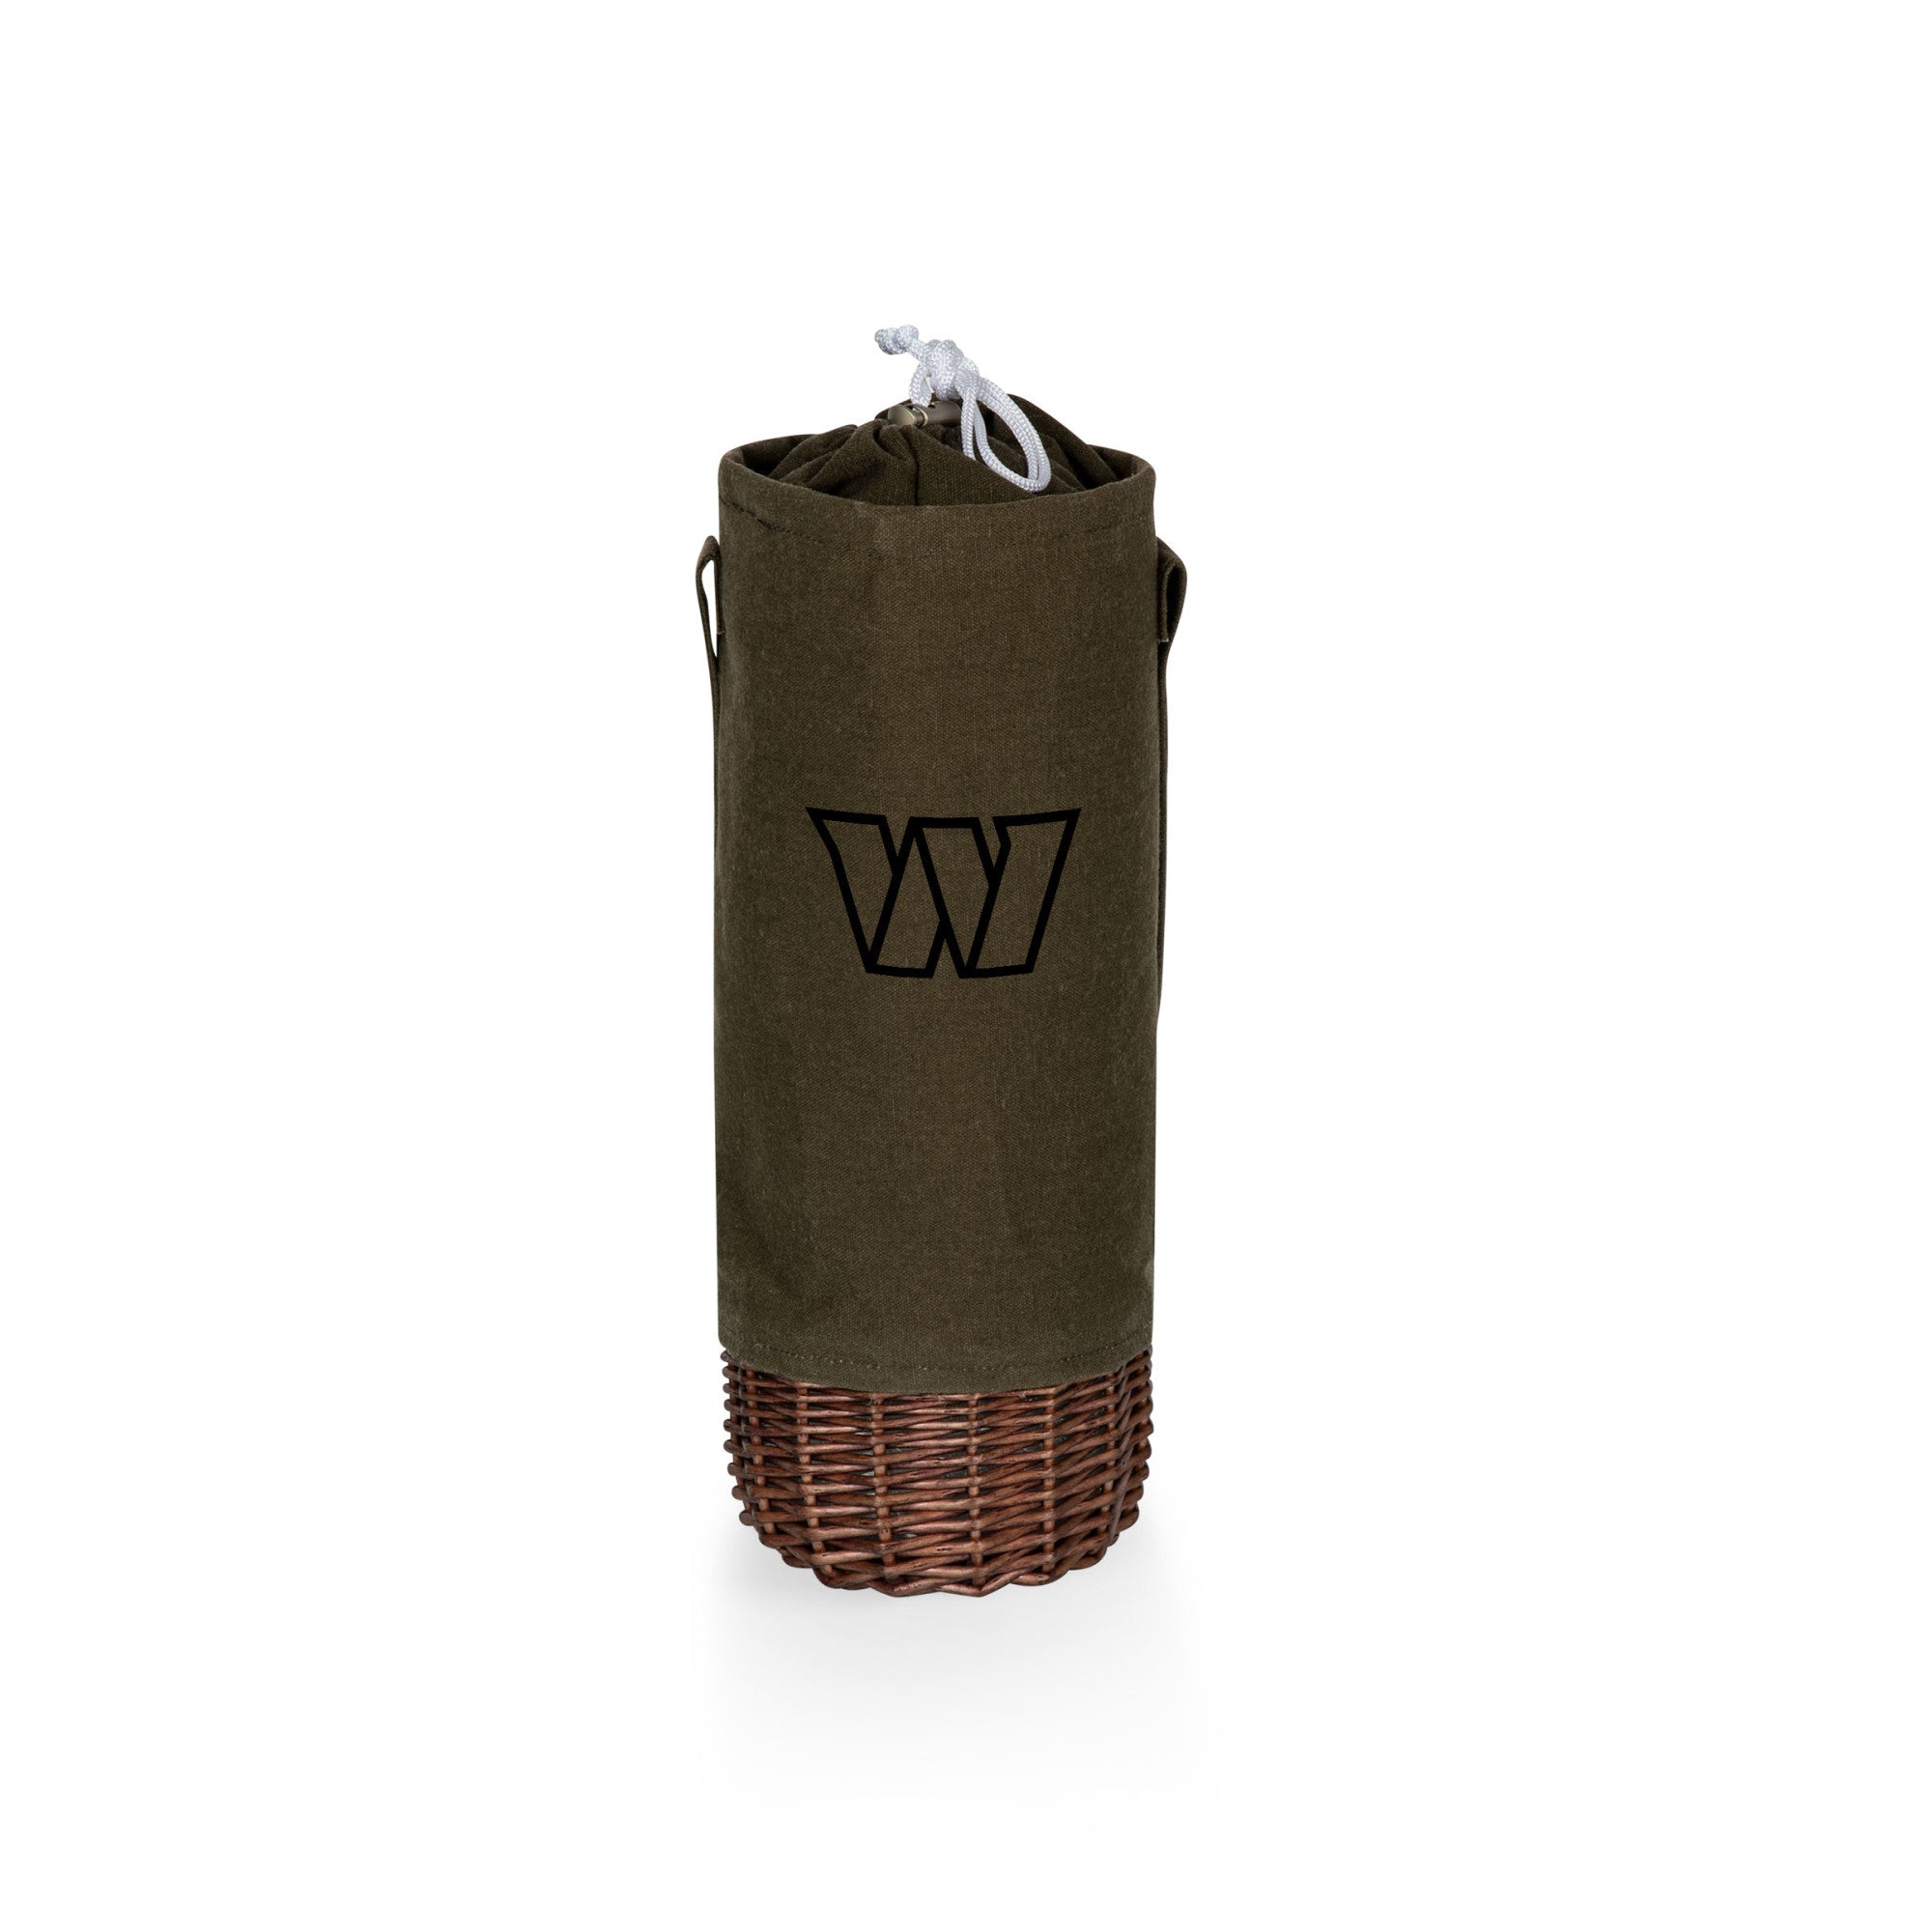 Washington Commanders - Malbec Insulated Canvas and Willow Wine Bottle Basket